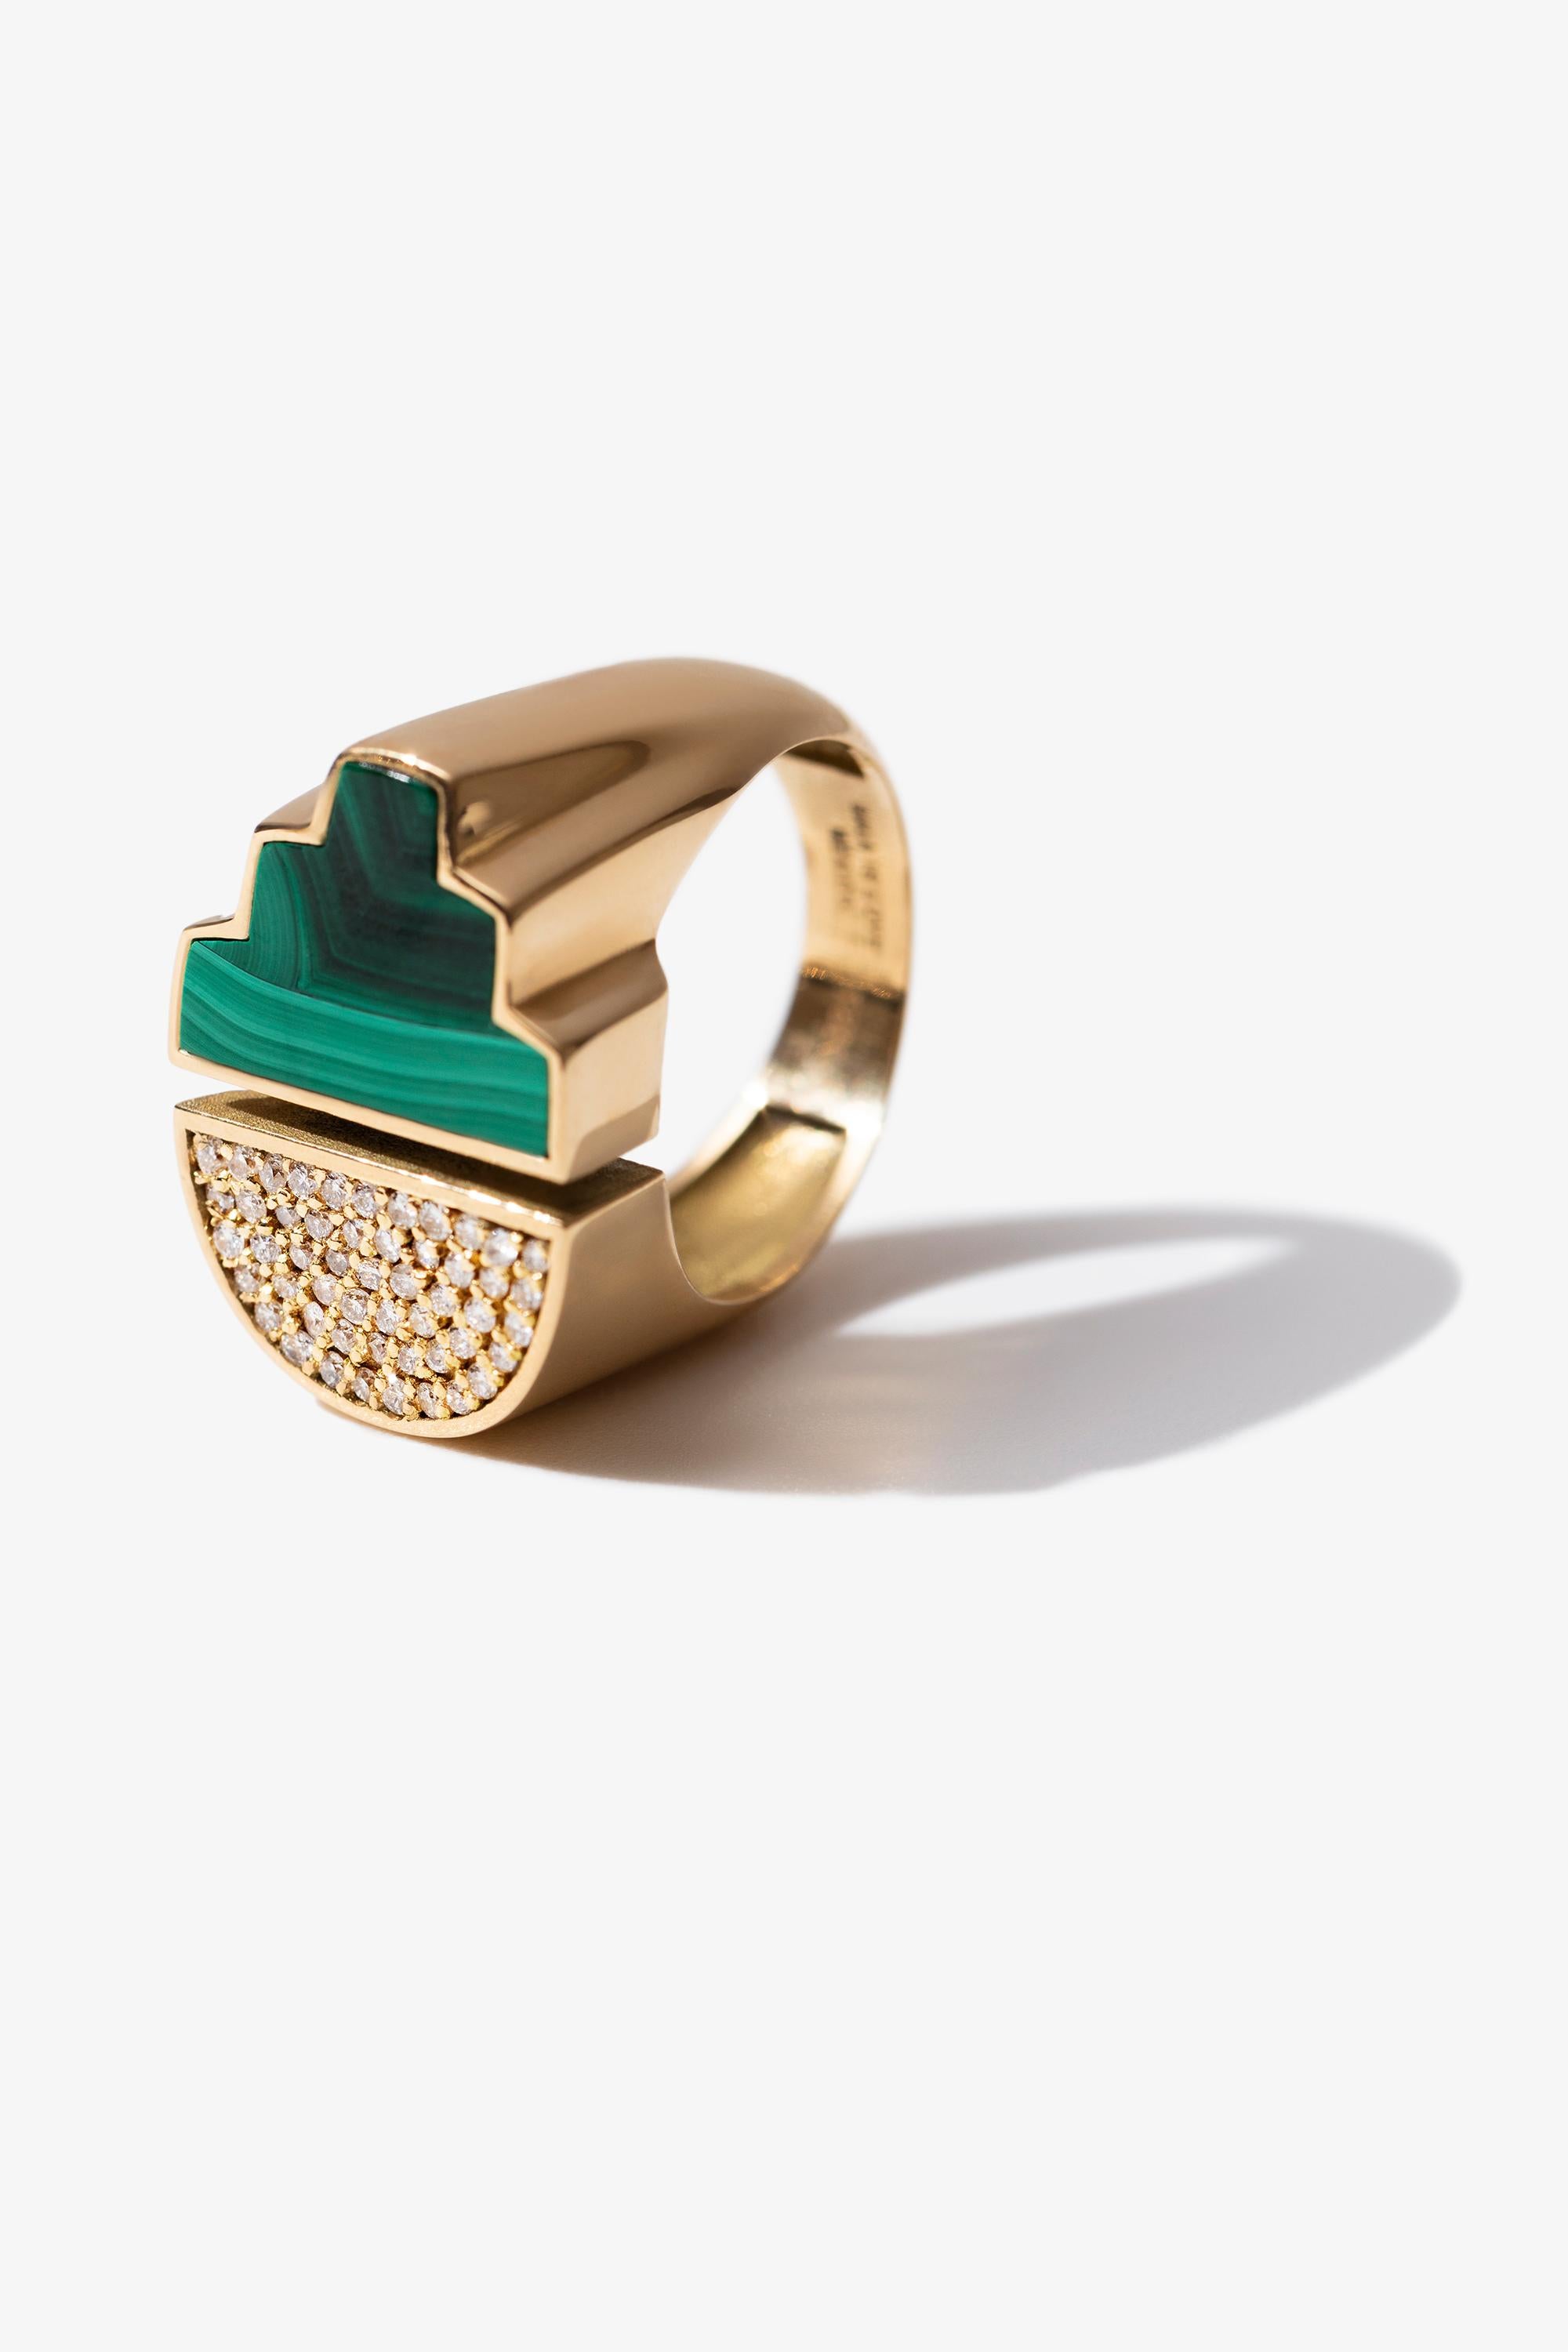 Teotihuacan - City of Gods.

Inspired by the the Teotihuacan Pyramids of the Sun and Moon, our 18-Karat Gold Signet Ring is set with shimmering white diamonds and hand-carved precious Malachite.

Made by hand at our Mexico City atelier.

Model is